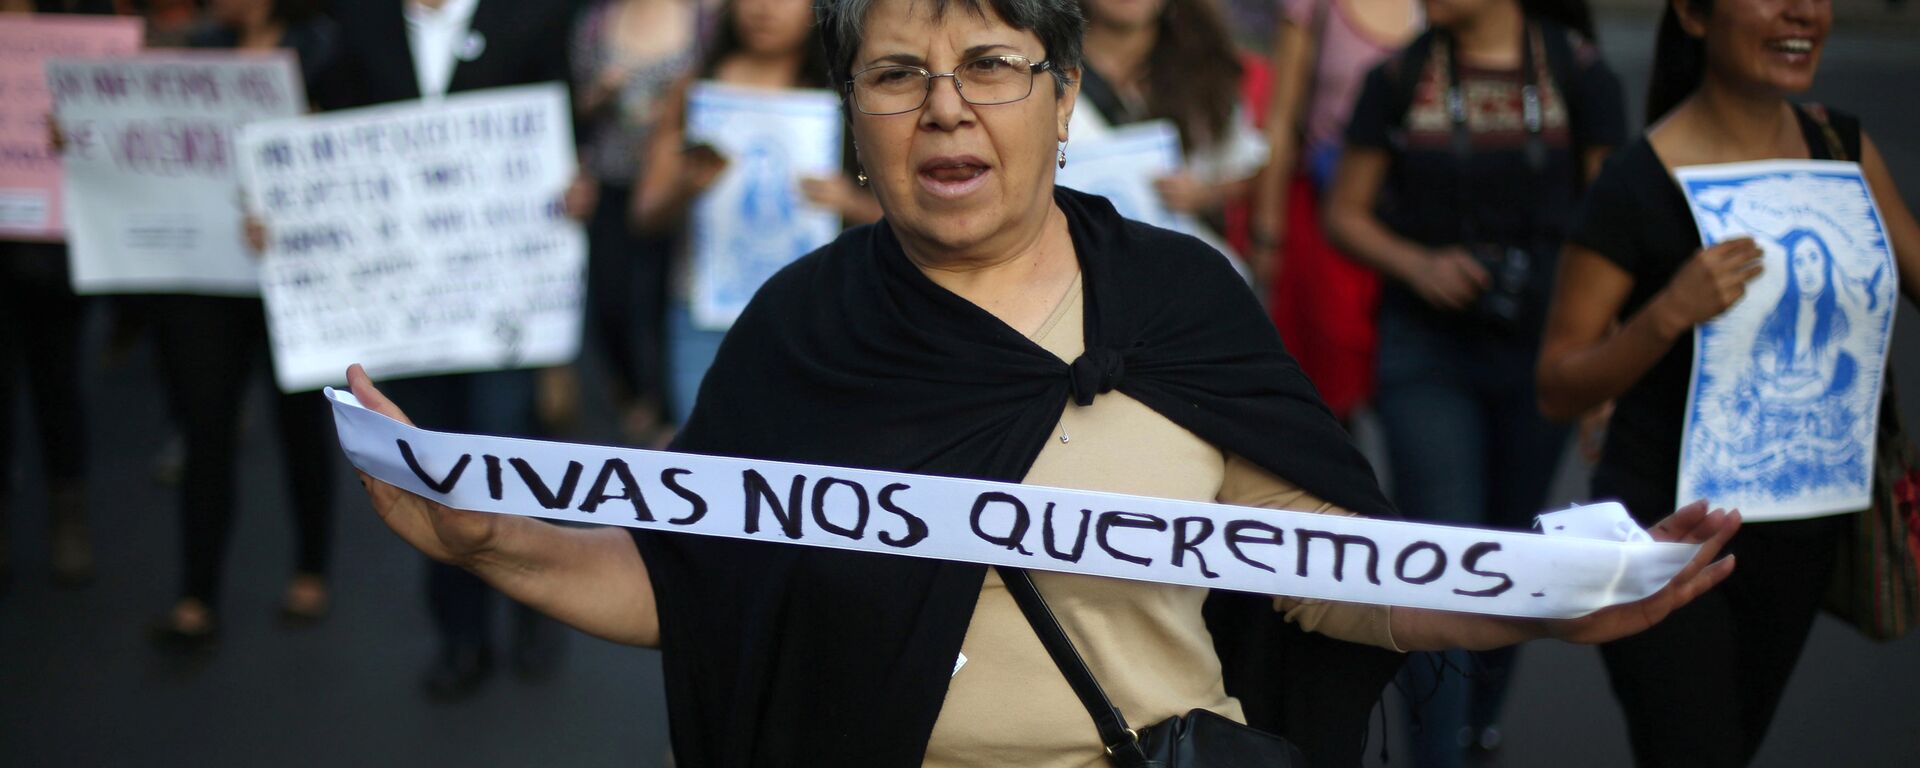 A woman takes part in a march to protest violence against women and the murder of a 16-year-old girl in a coastal town of Argentina last week, at Reforma avenue, in Mexico City, Mexico, October 19, 2016 - Sputnik Mundo, 1920, 31.01.2022